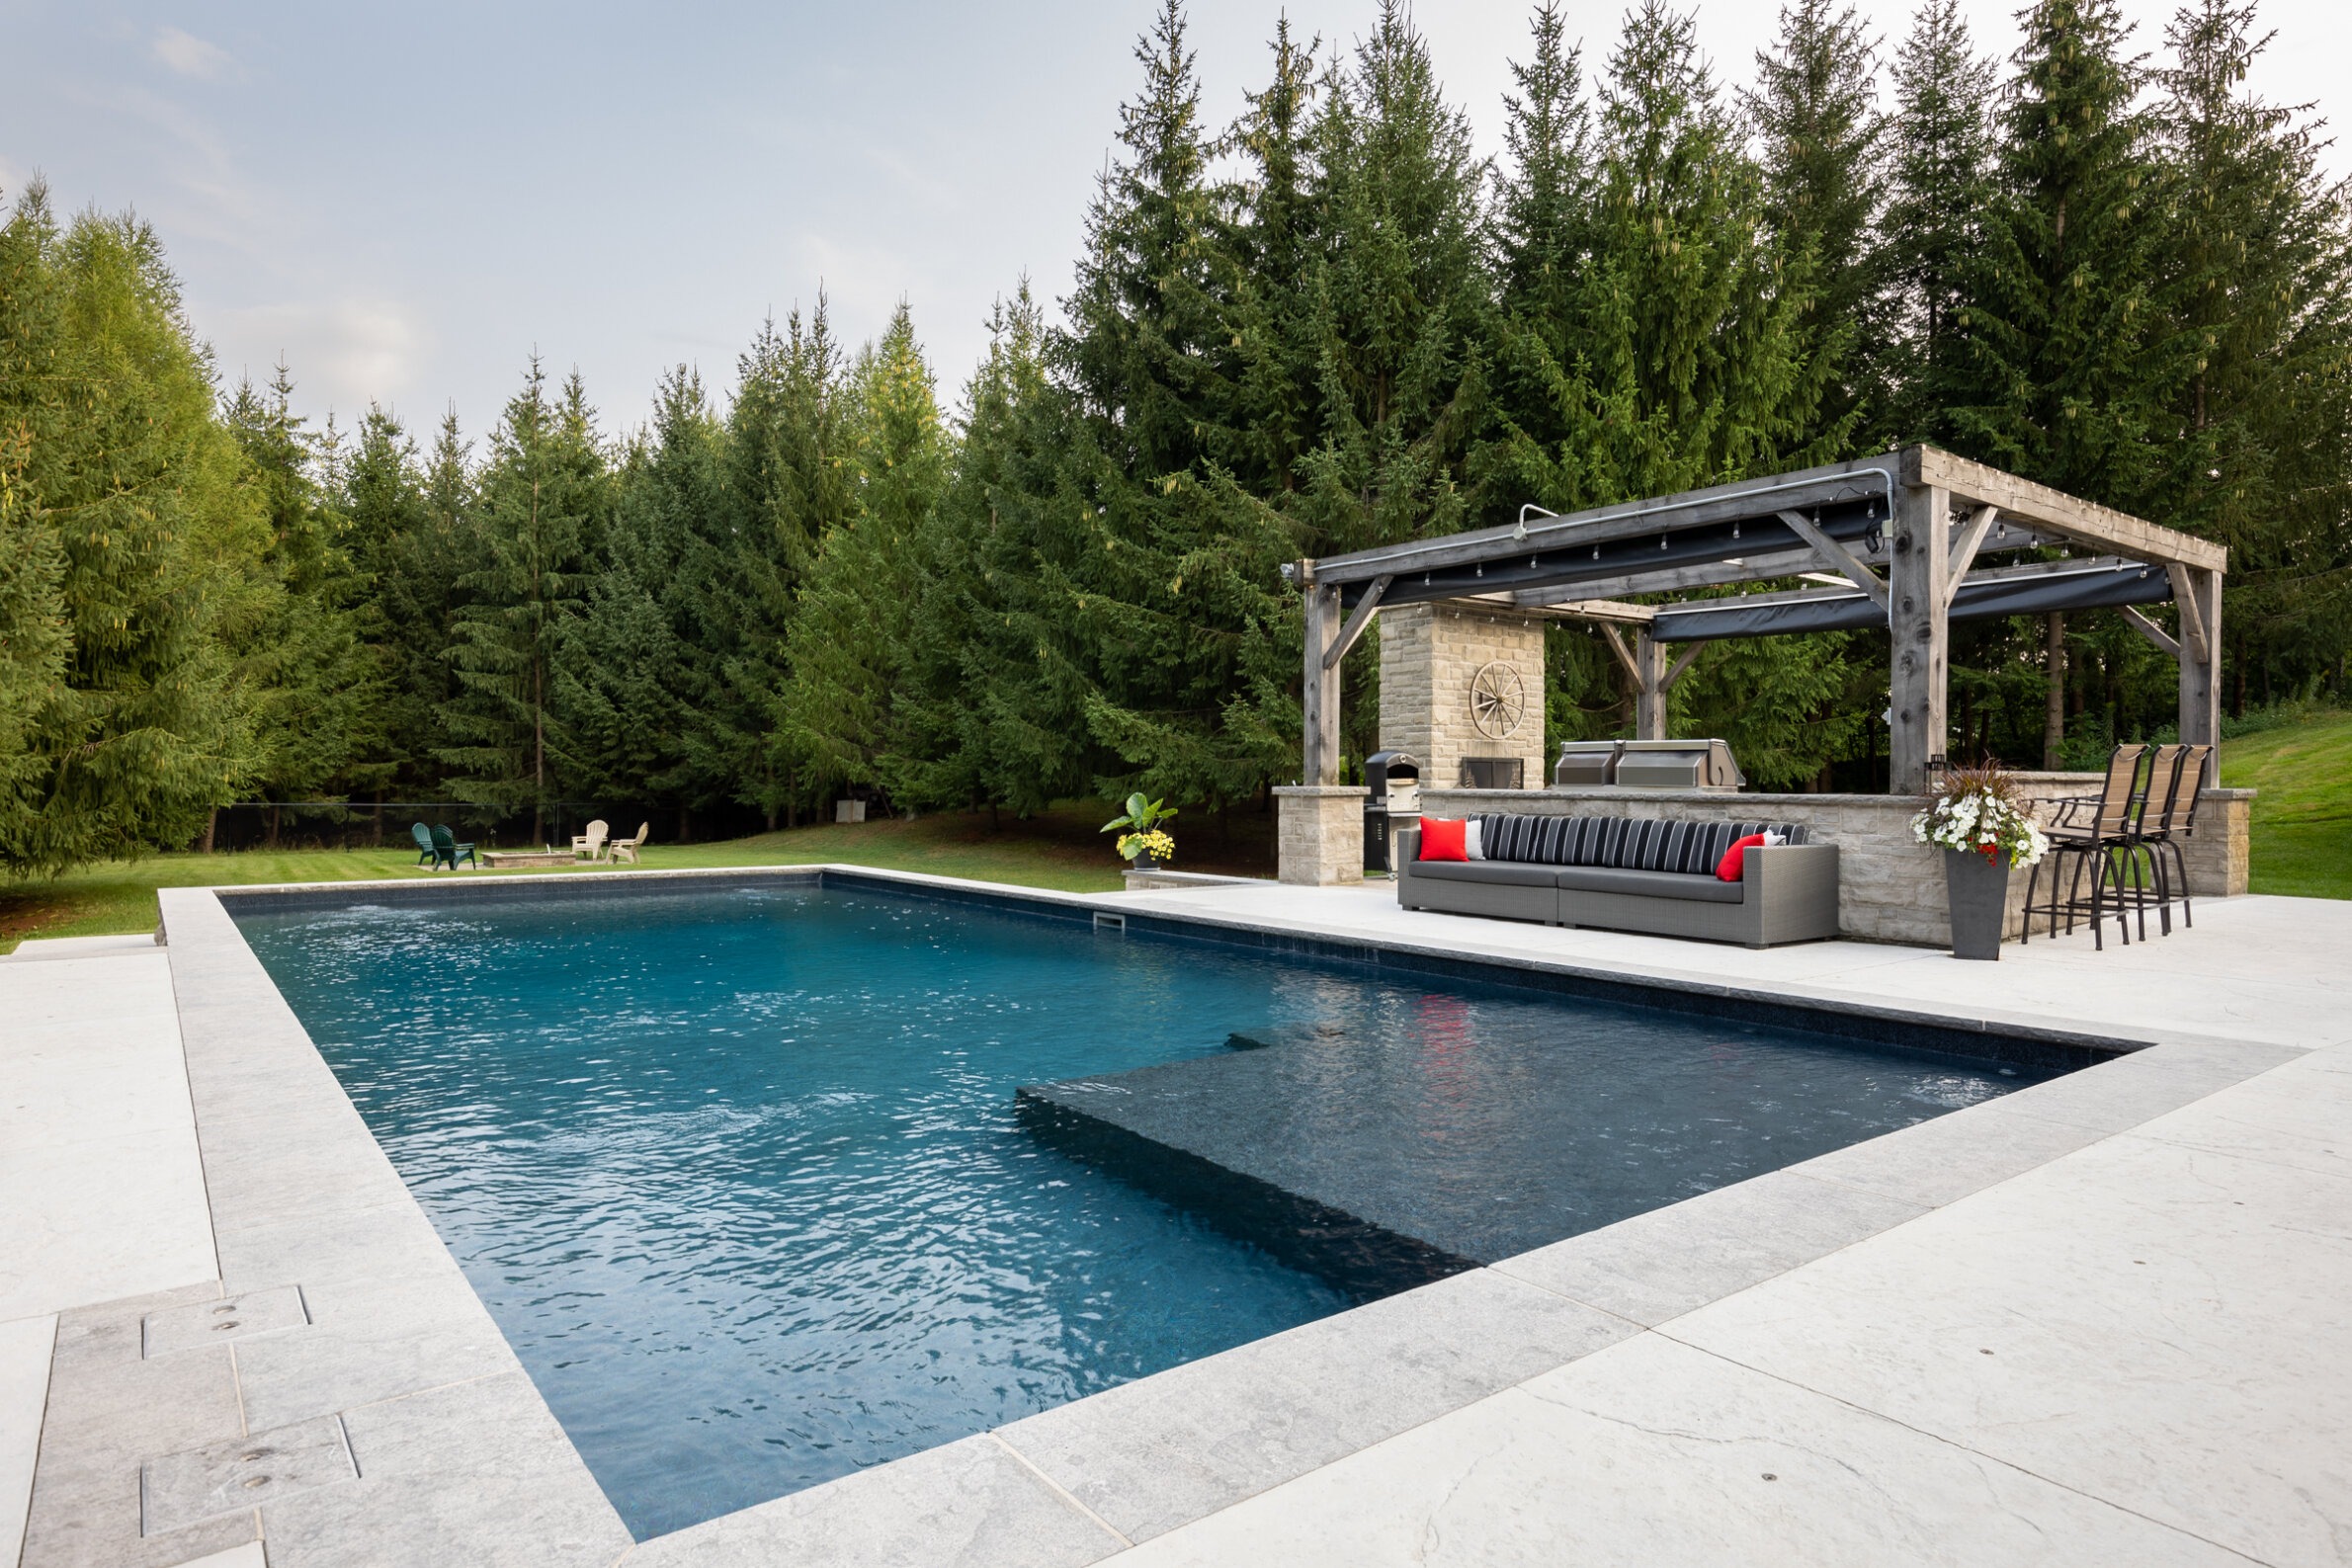 An outdoor swimming pool with lounge area and pergola set against a backdrop of tall green trees under a cloudy sky. Modern, tranquil, and luxurious setting.